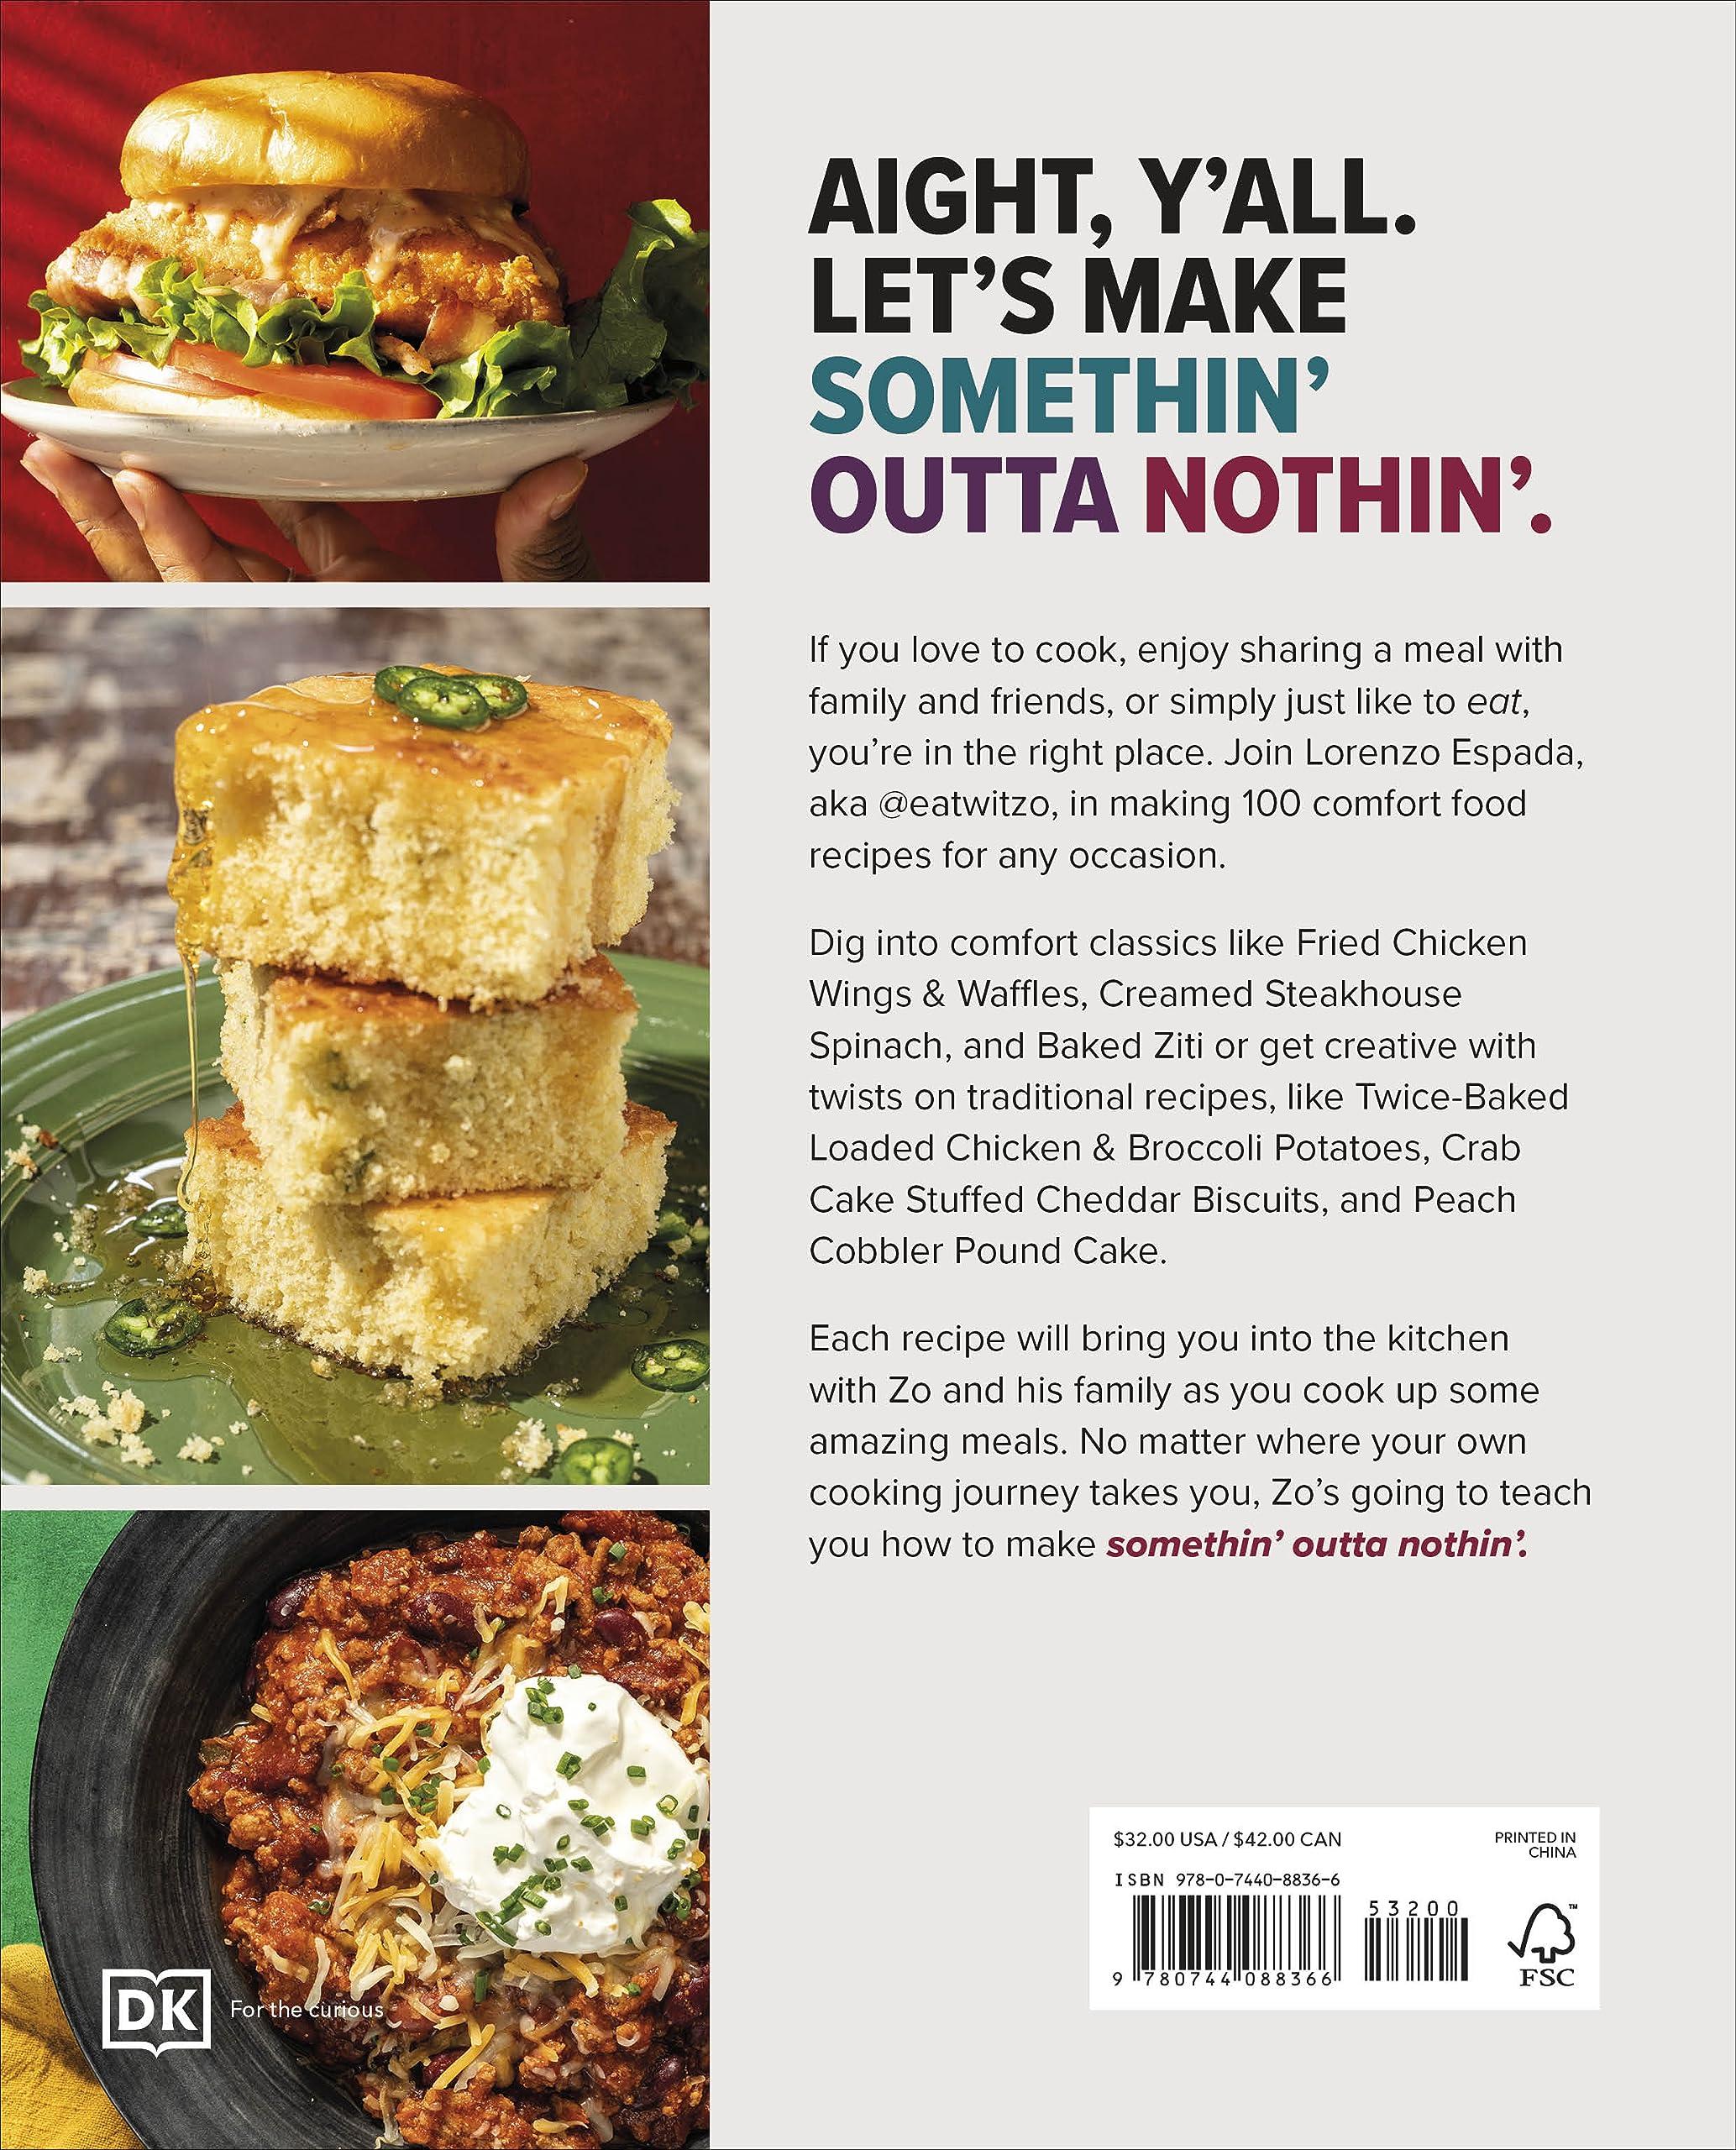 Somethin' Outta Nothin': 100 Creative Comfort Food Recipes for Everyone